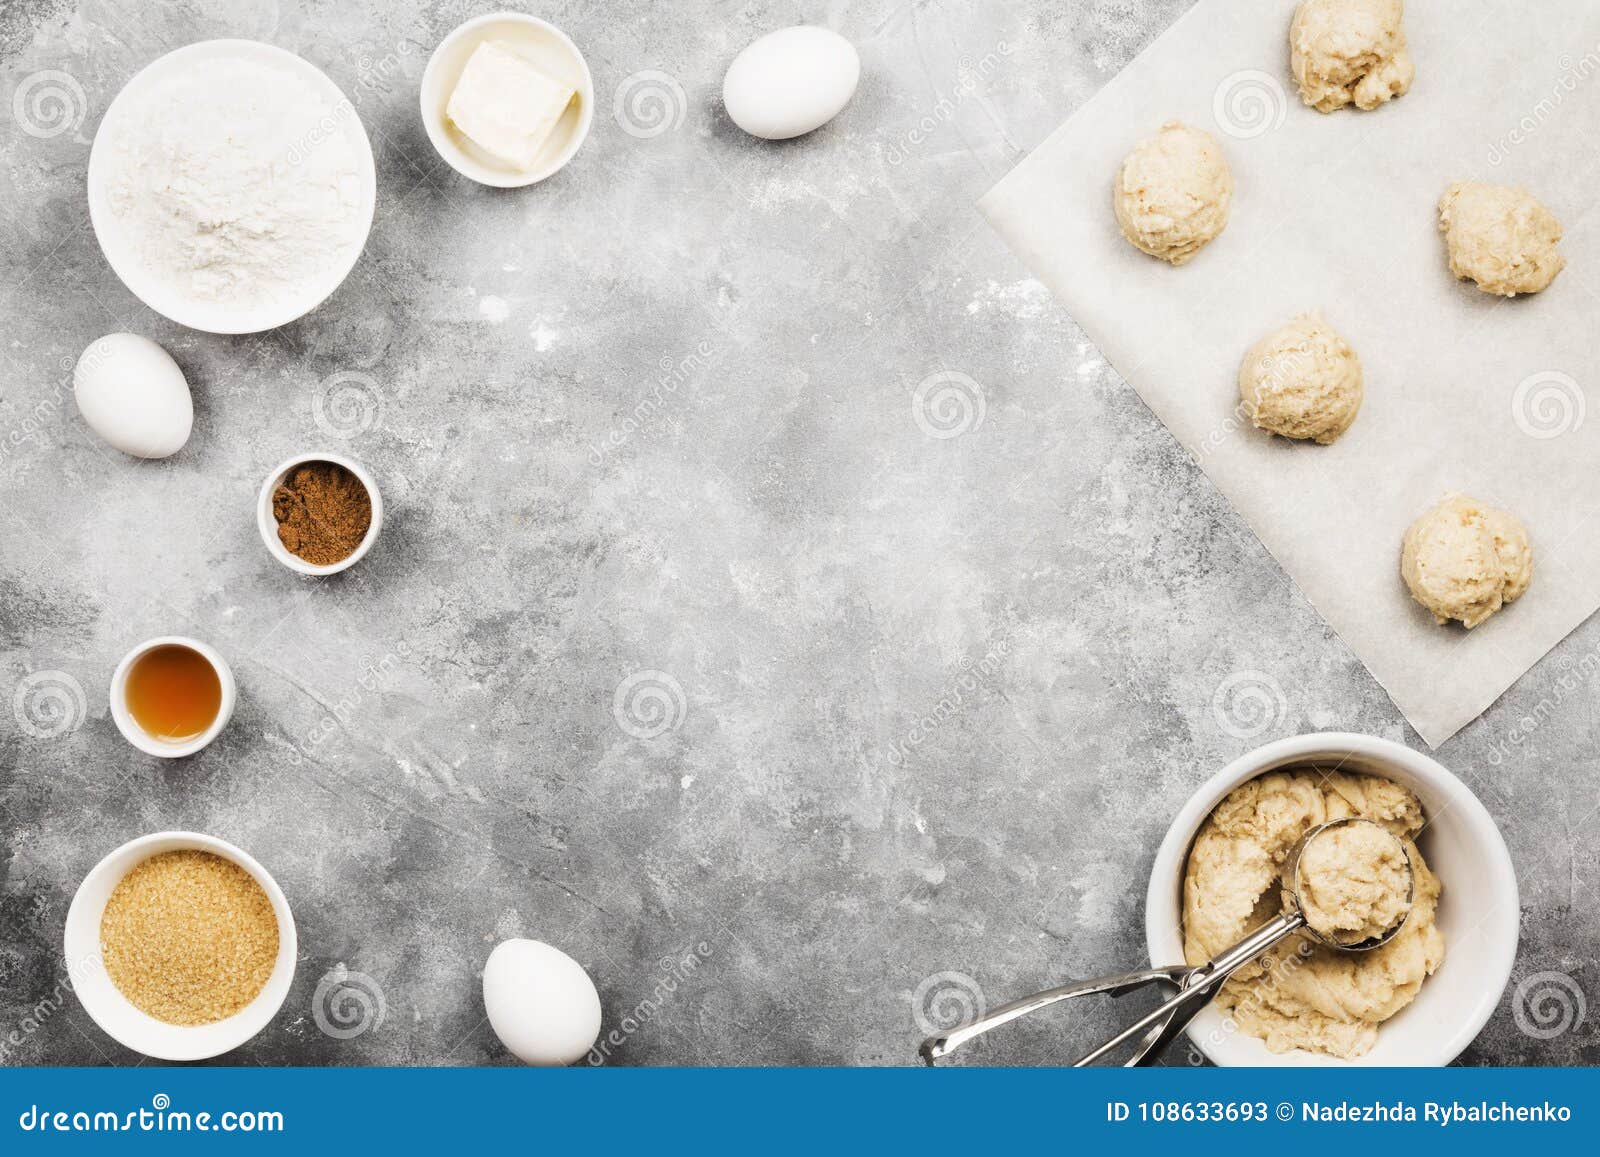 Ingredients for Baking of Cookies - Flour, Eggs, Spices, Vanilla Stock ...